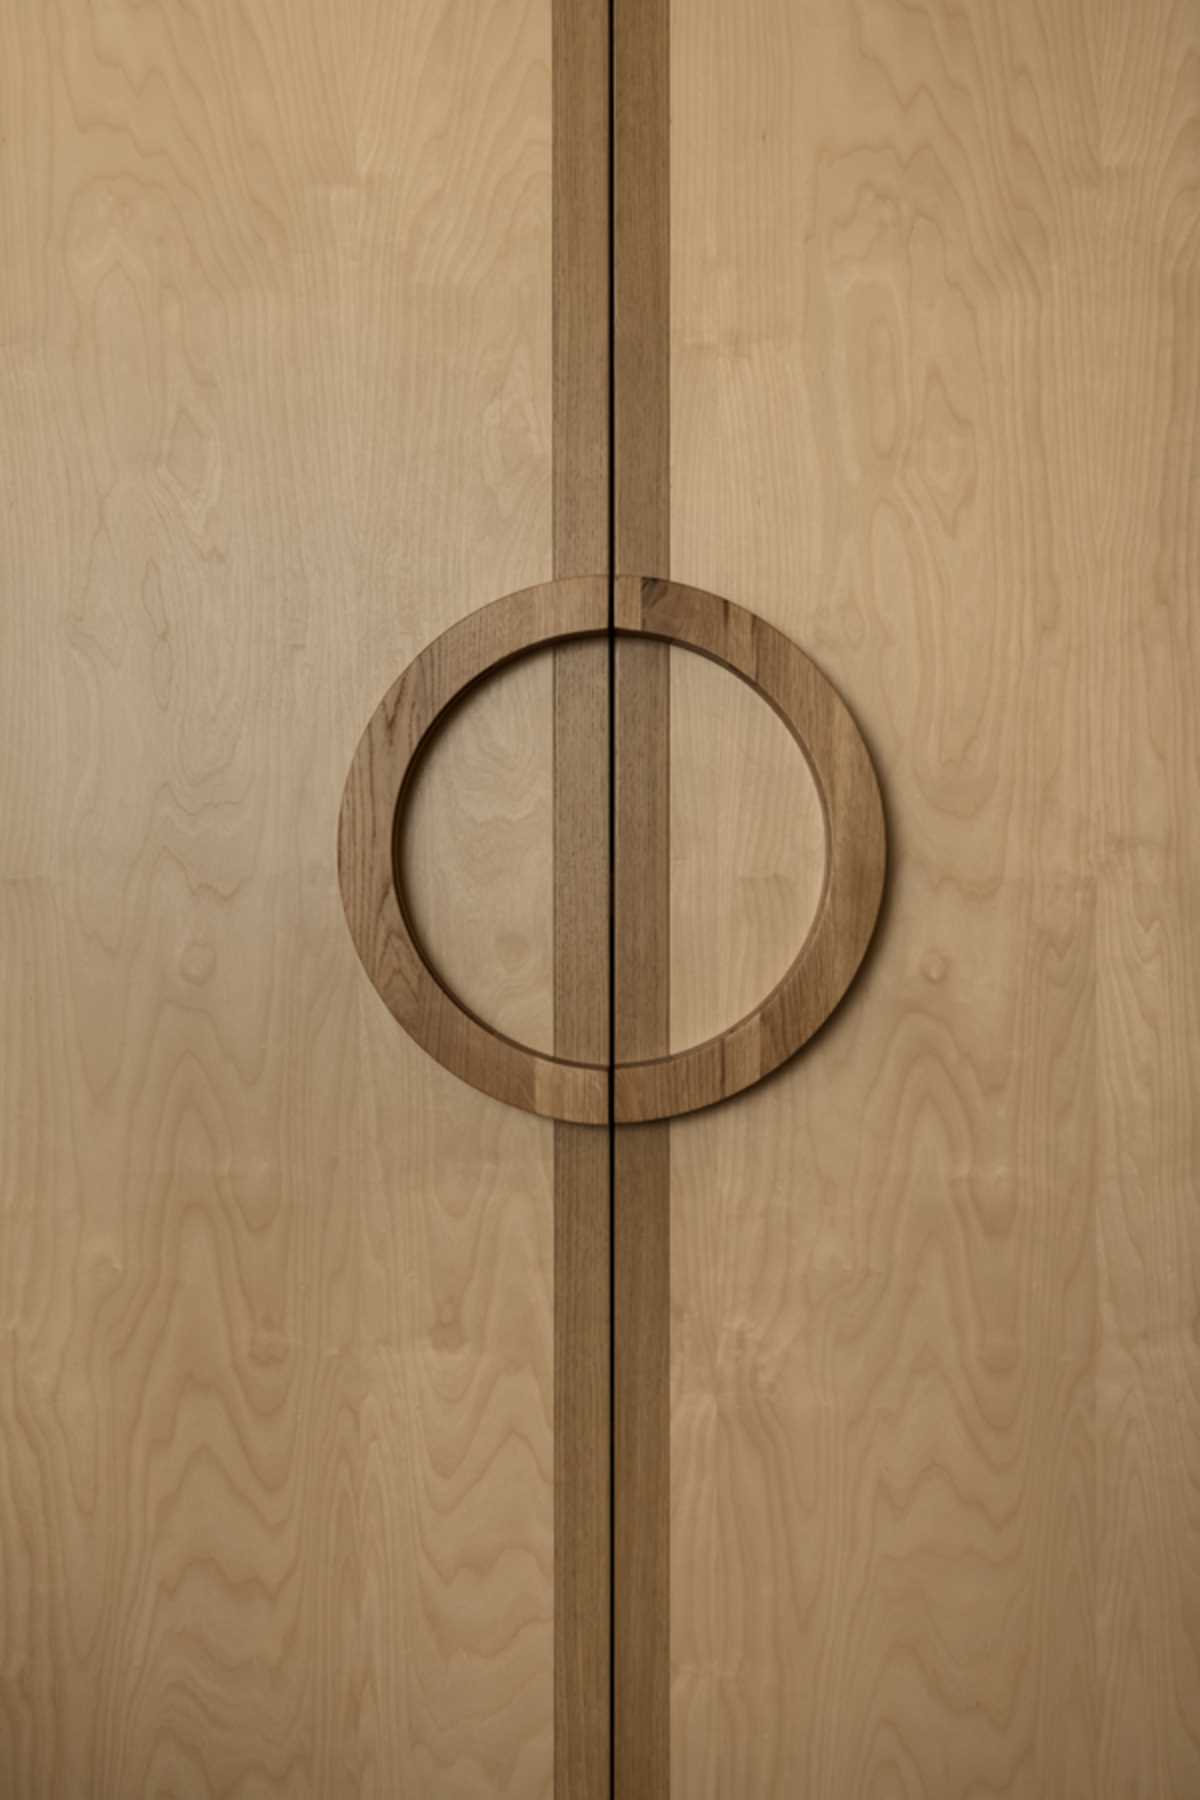 These floor-to-ceiling closets have door handles that make a circle when closed.